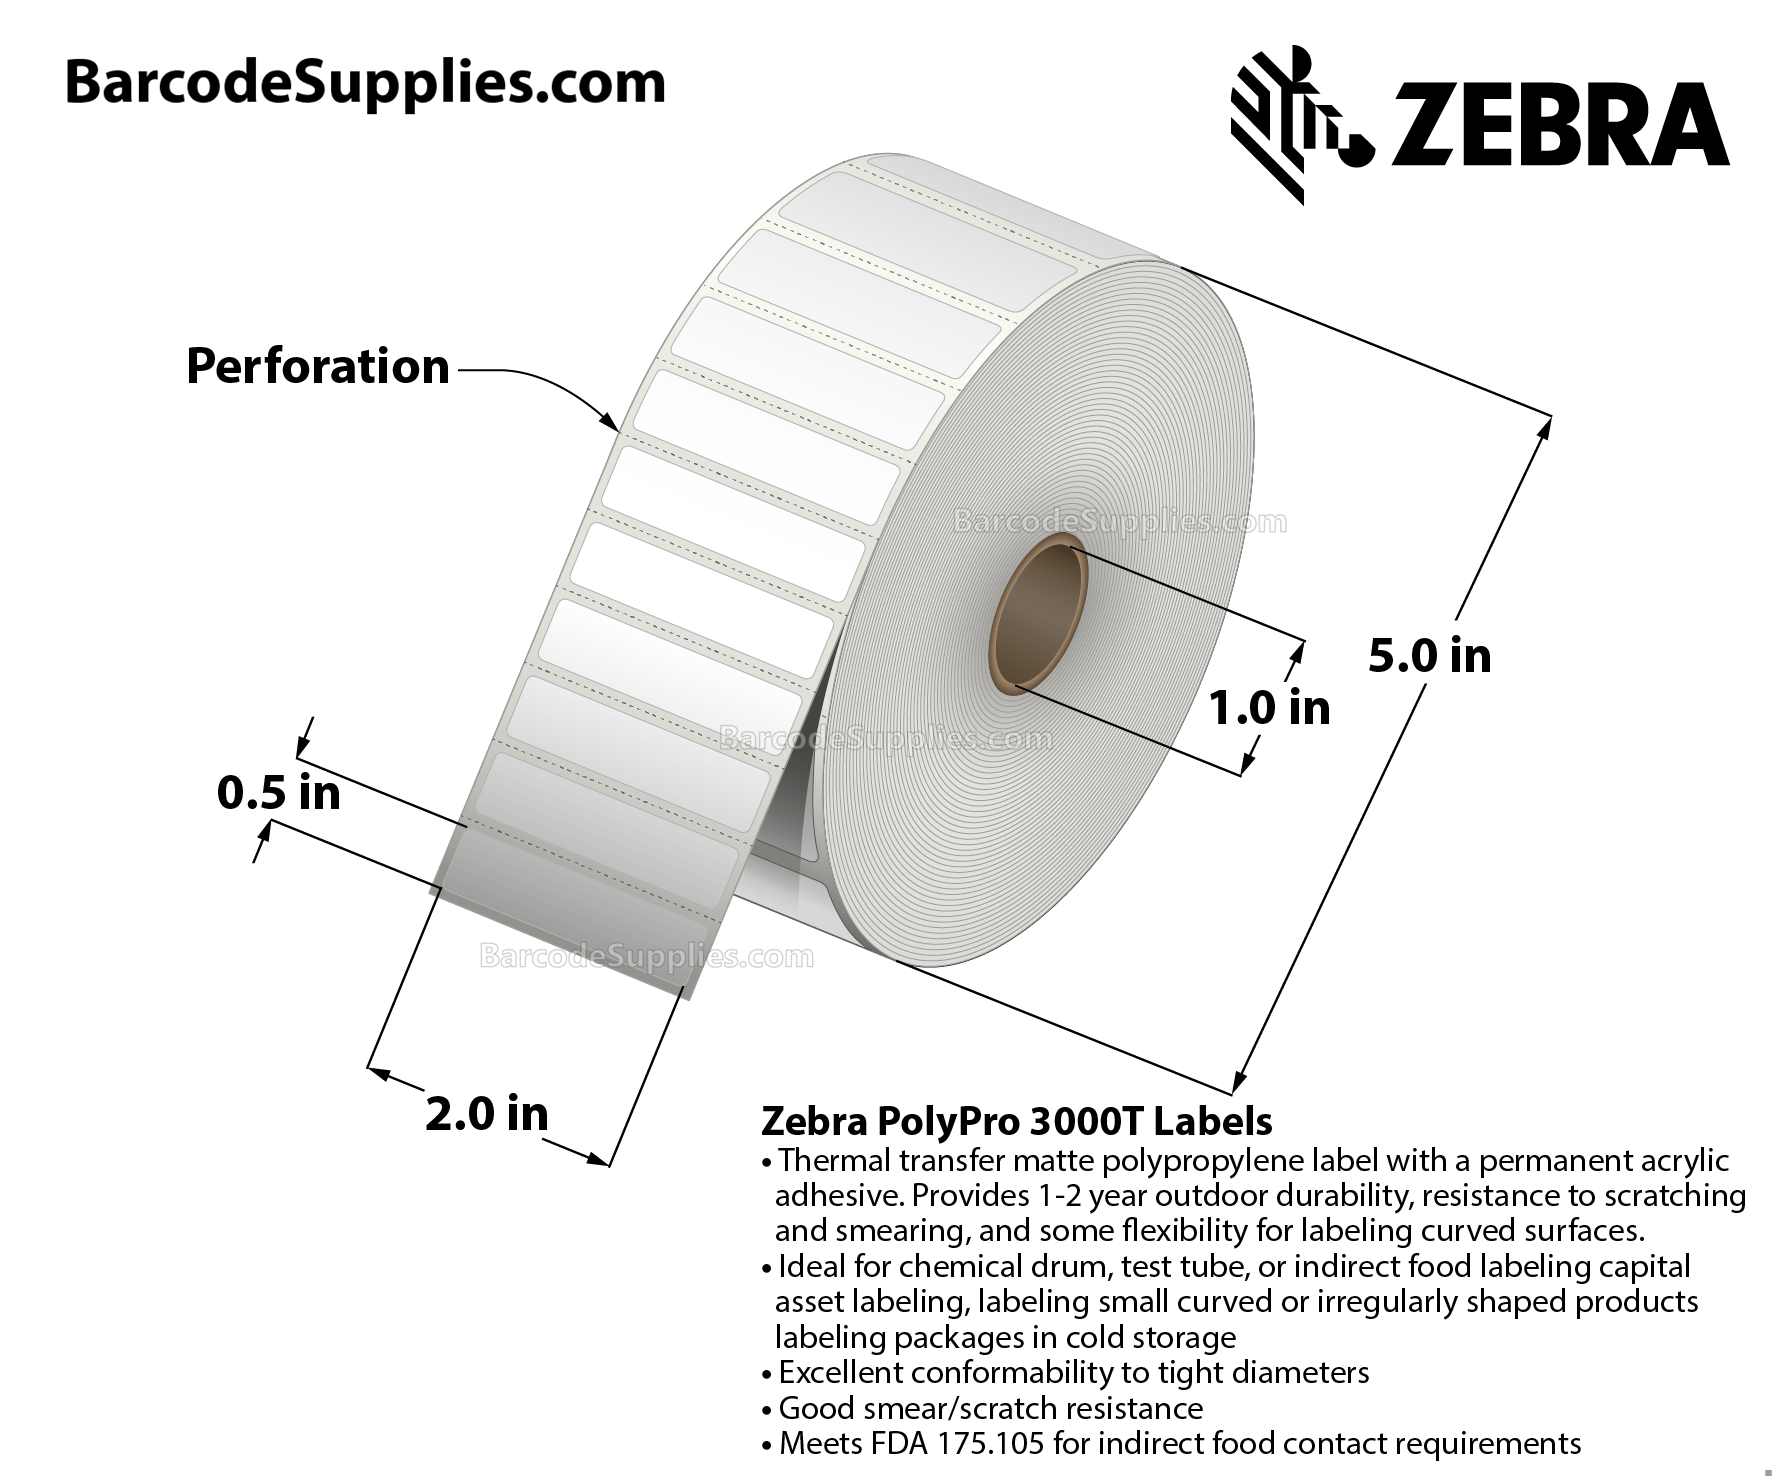 2 x 0.5 Thermal Transfer White PolyPro 3000T Labels With Permanent Adhesive - Perforated - 3780 Labels Per Roll - Carton Of 8 Rolls - 30240 Labels Total - MPN: 18928